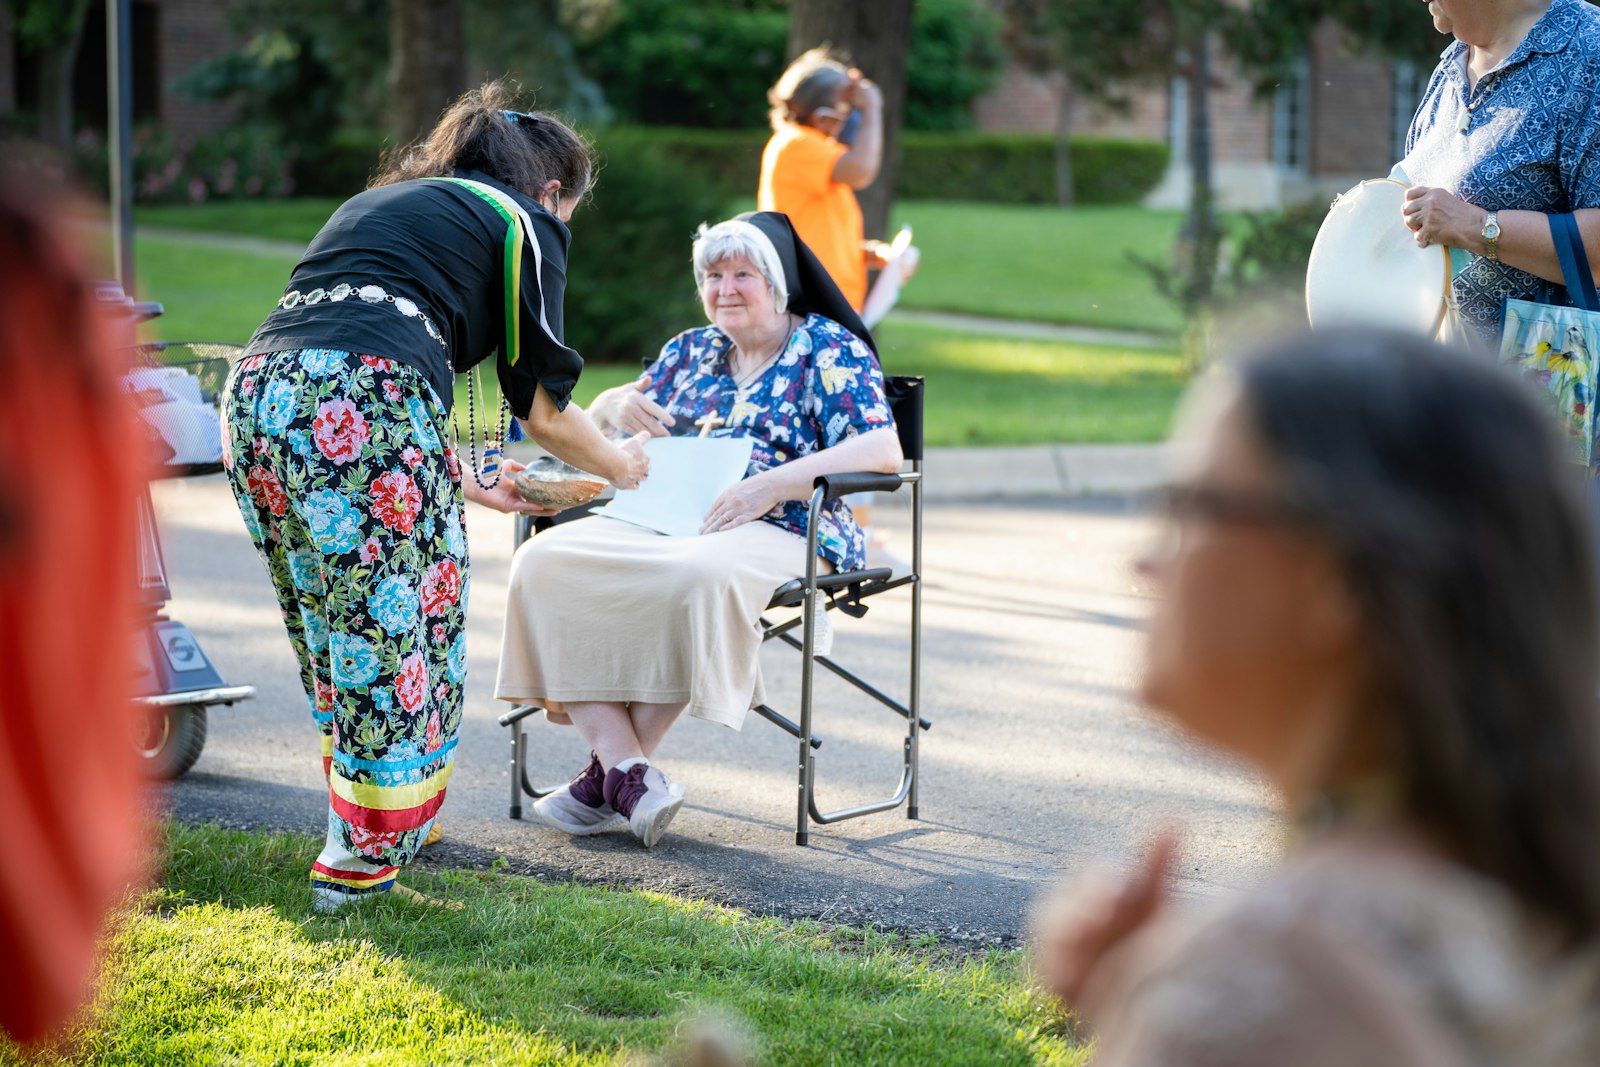 The Felician Sisters in Livonia have regularly hosted the St. Kateri Tekakwitha Nicholas Black Elk Circle for solstice prayer services. The solstice blessing is an opportunity for Native American Catholics to share their culture with the wider Church, said Fr. Charles Morris, who presided over the blessing.